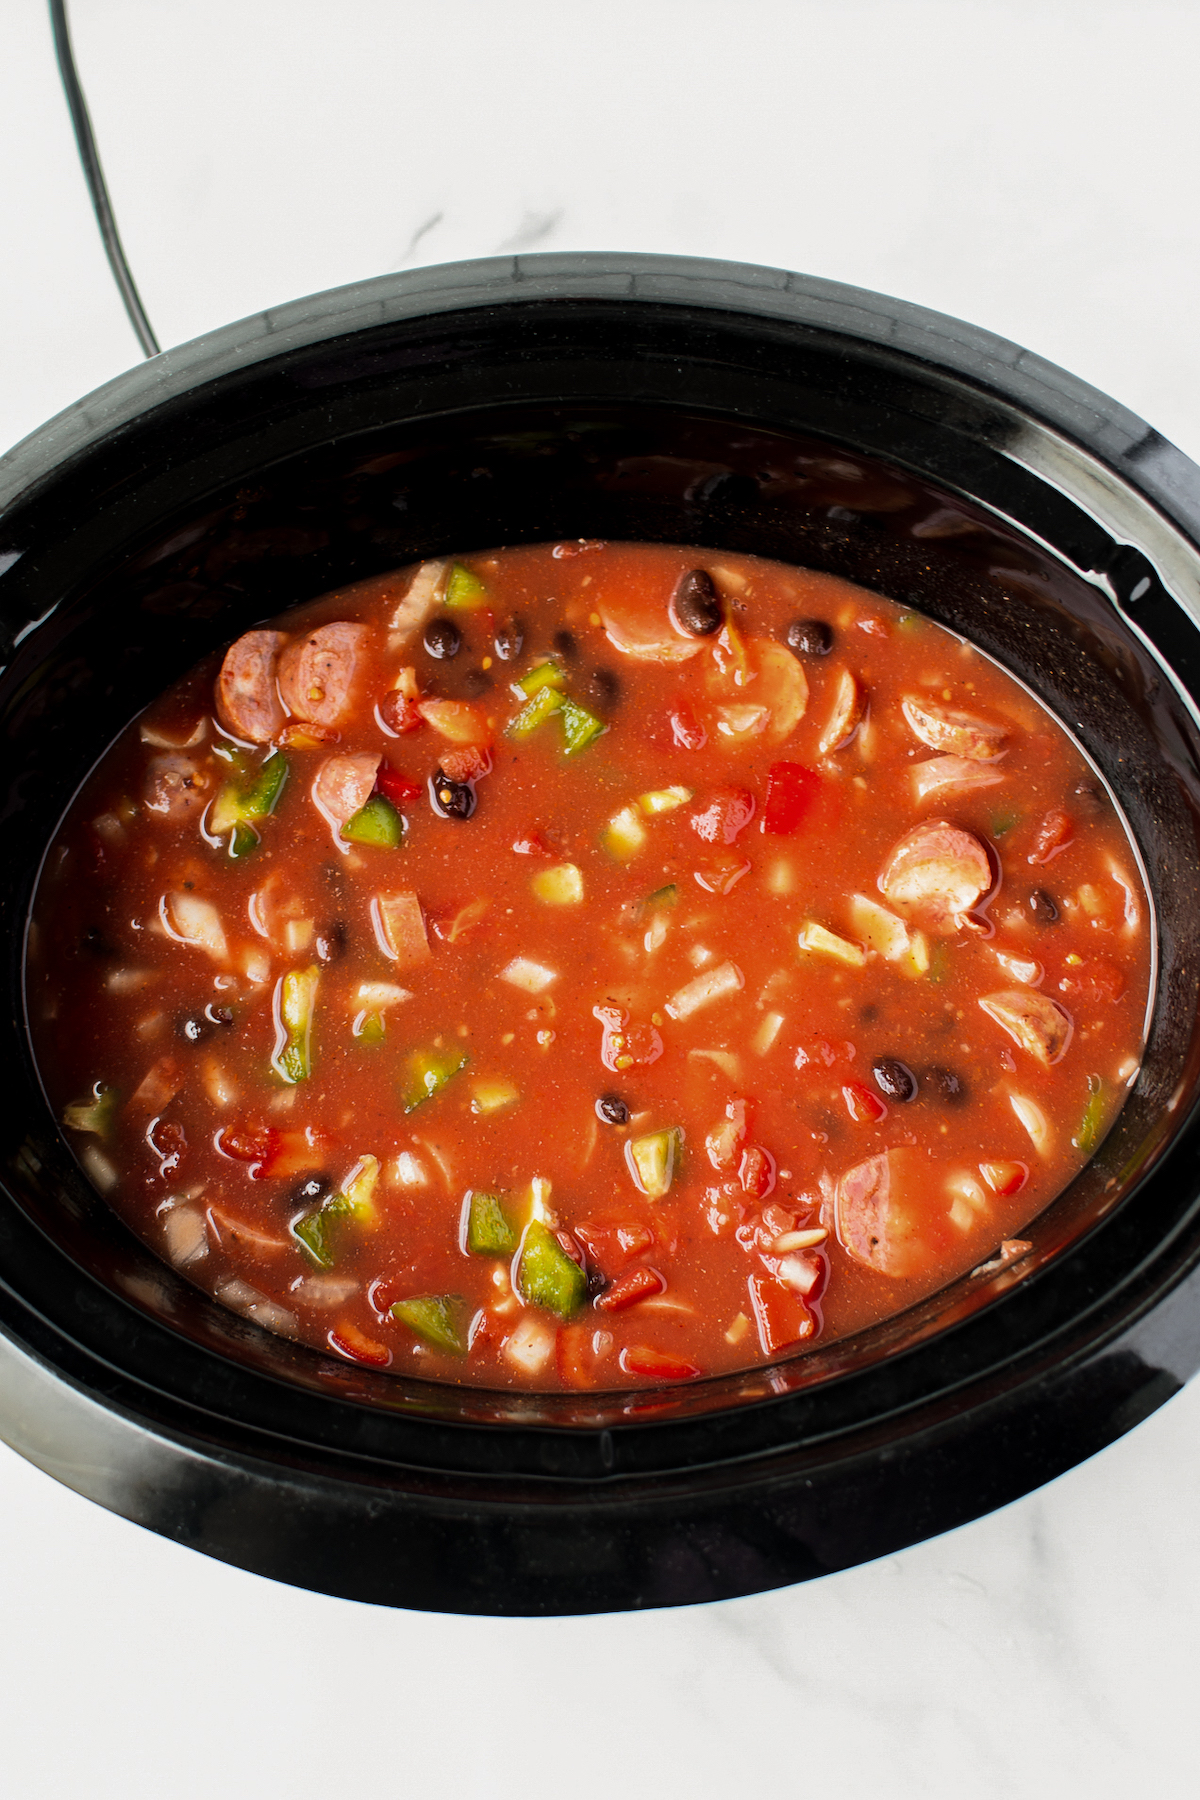 Overhead shot of a crockpot insert filled with veggies, black beans, and other ingredients in a tomato-based sauce.